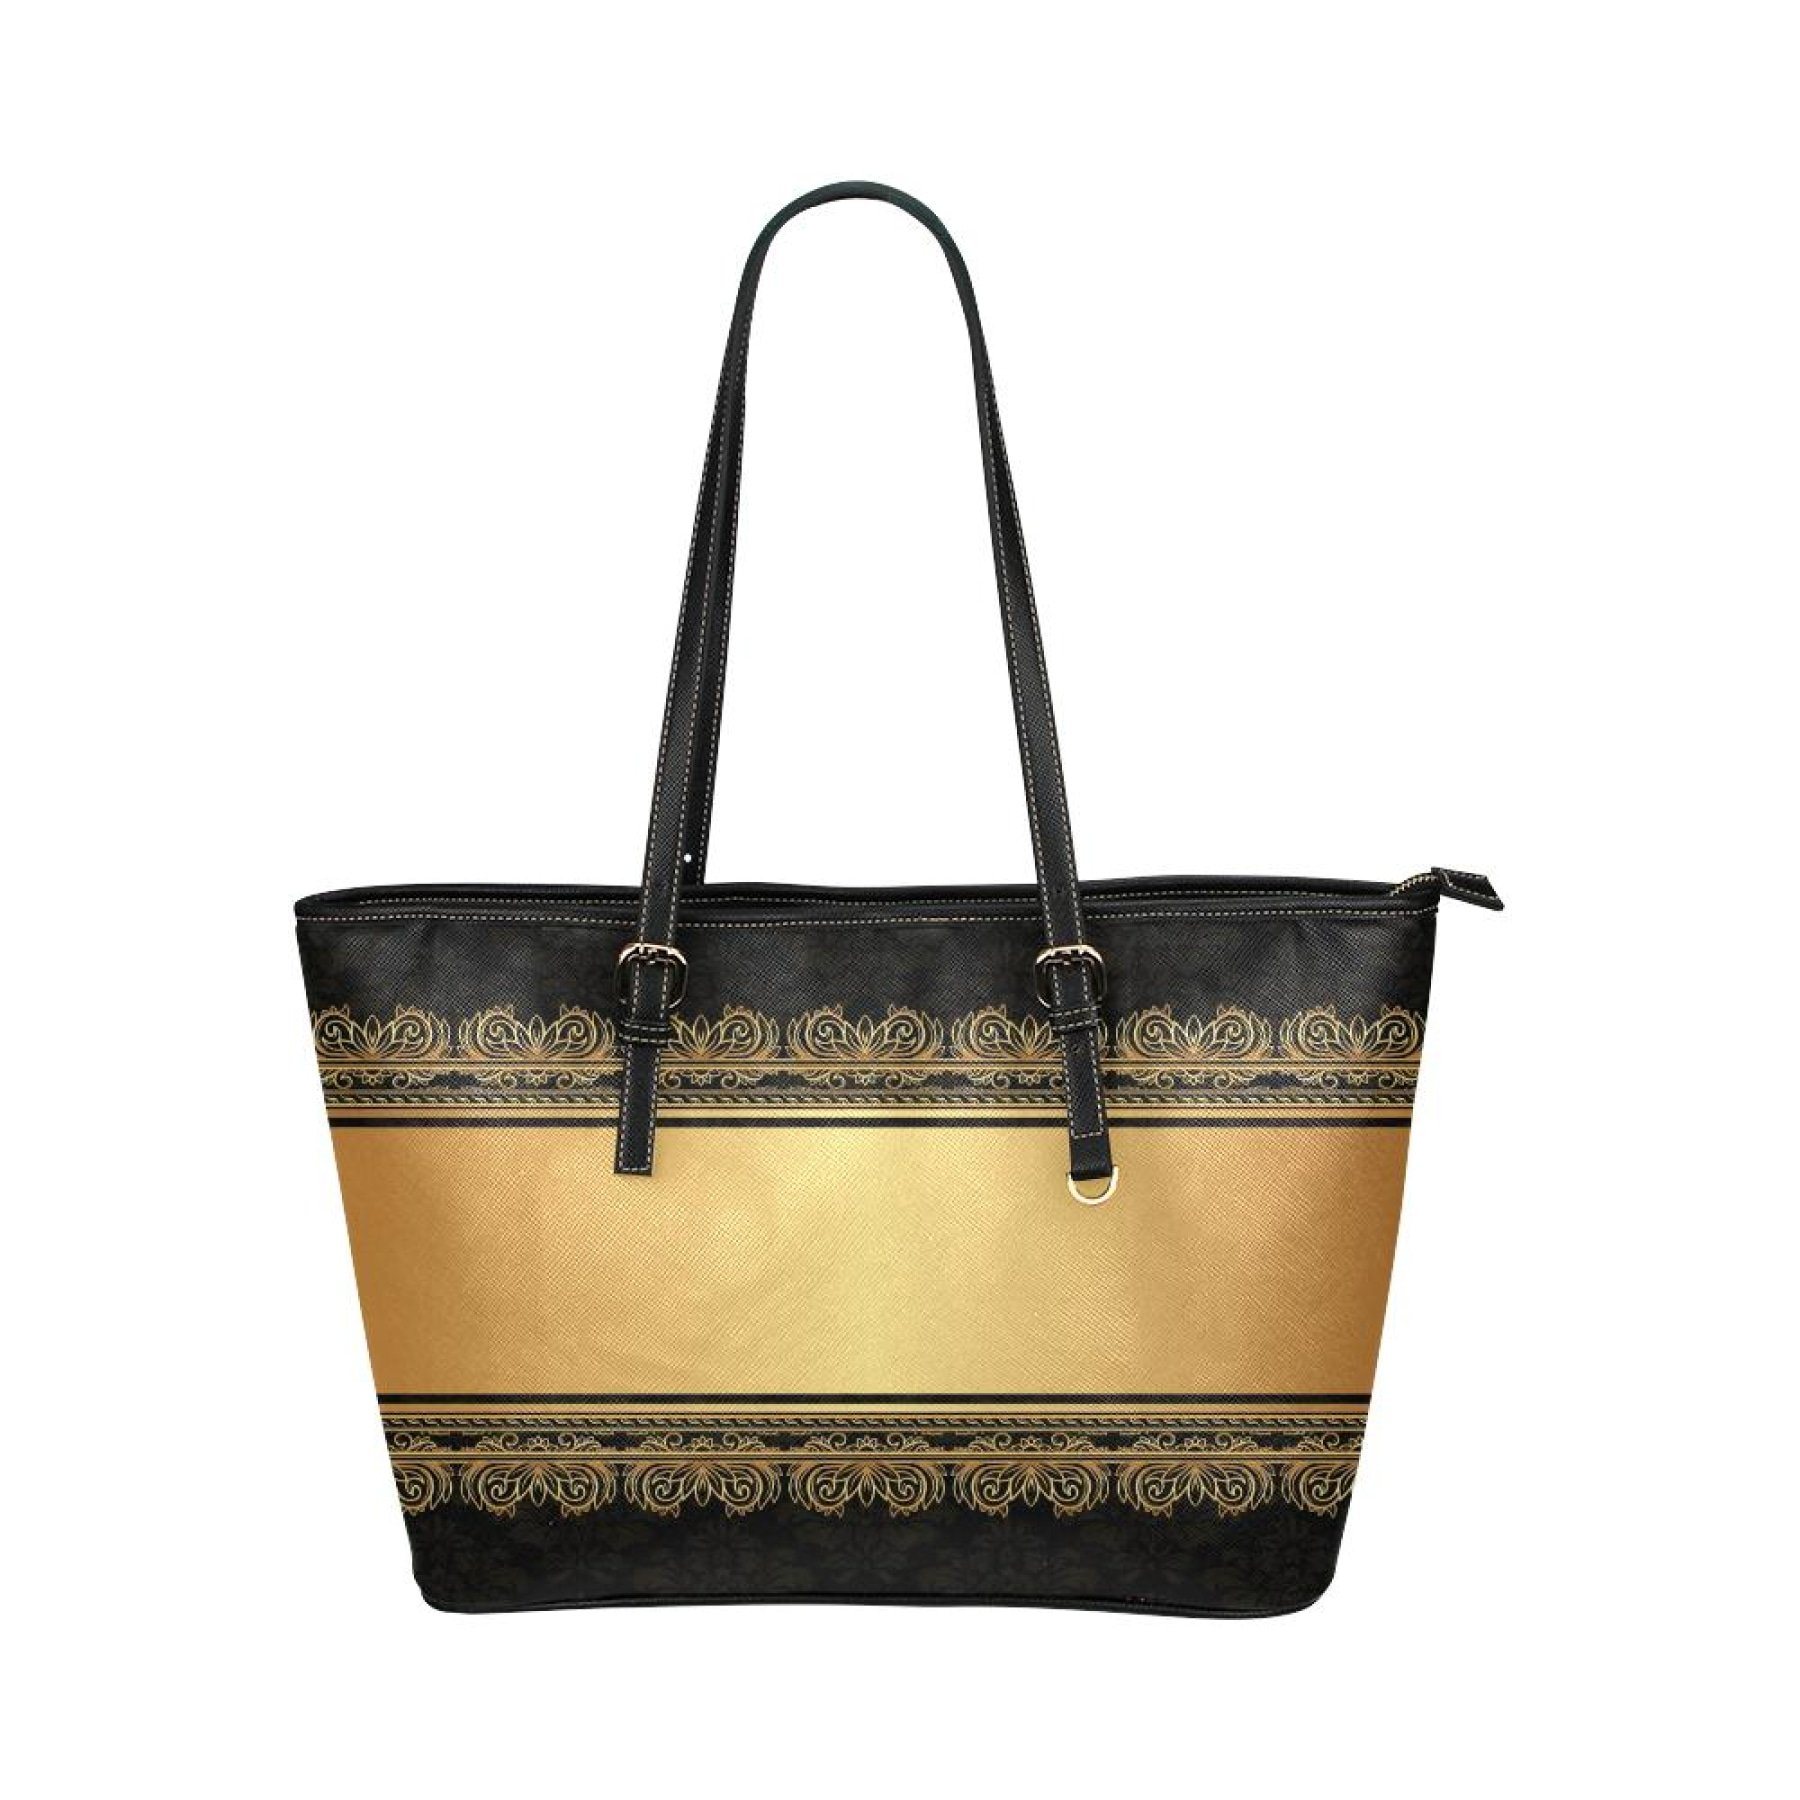 Black And Gold Vintage Style Leather Tote Bag 13